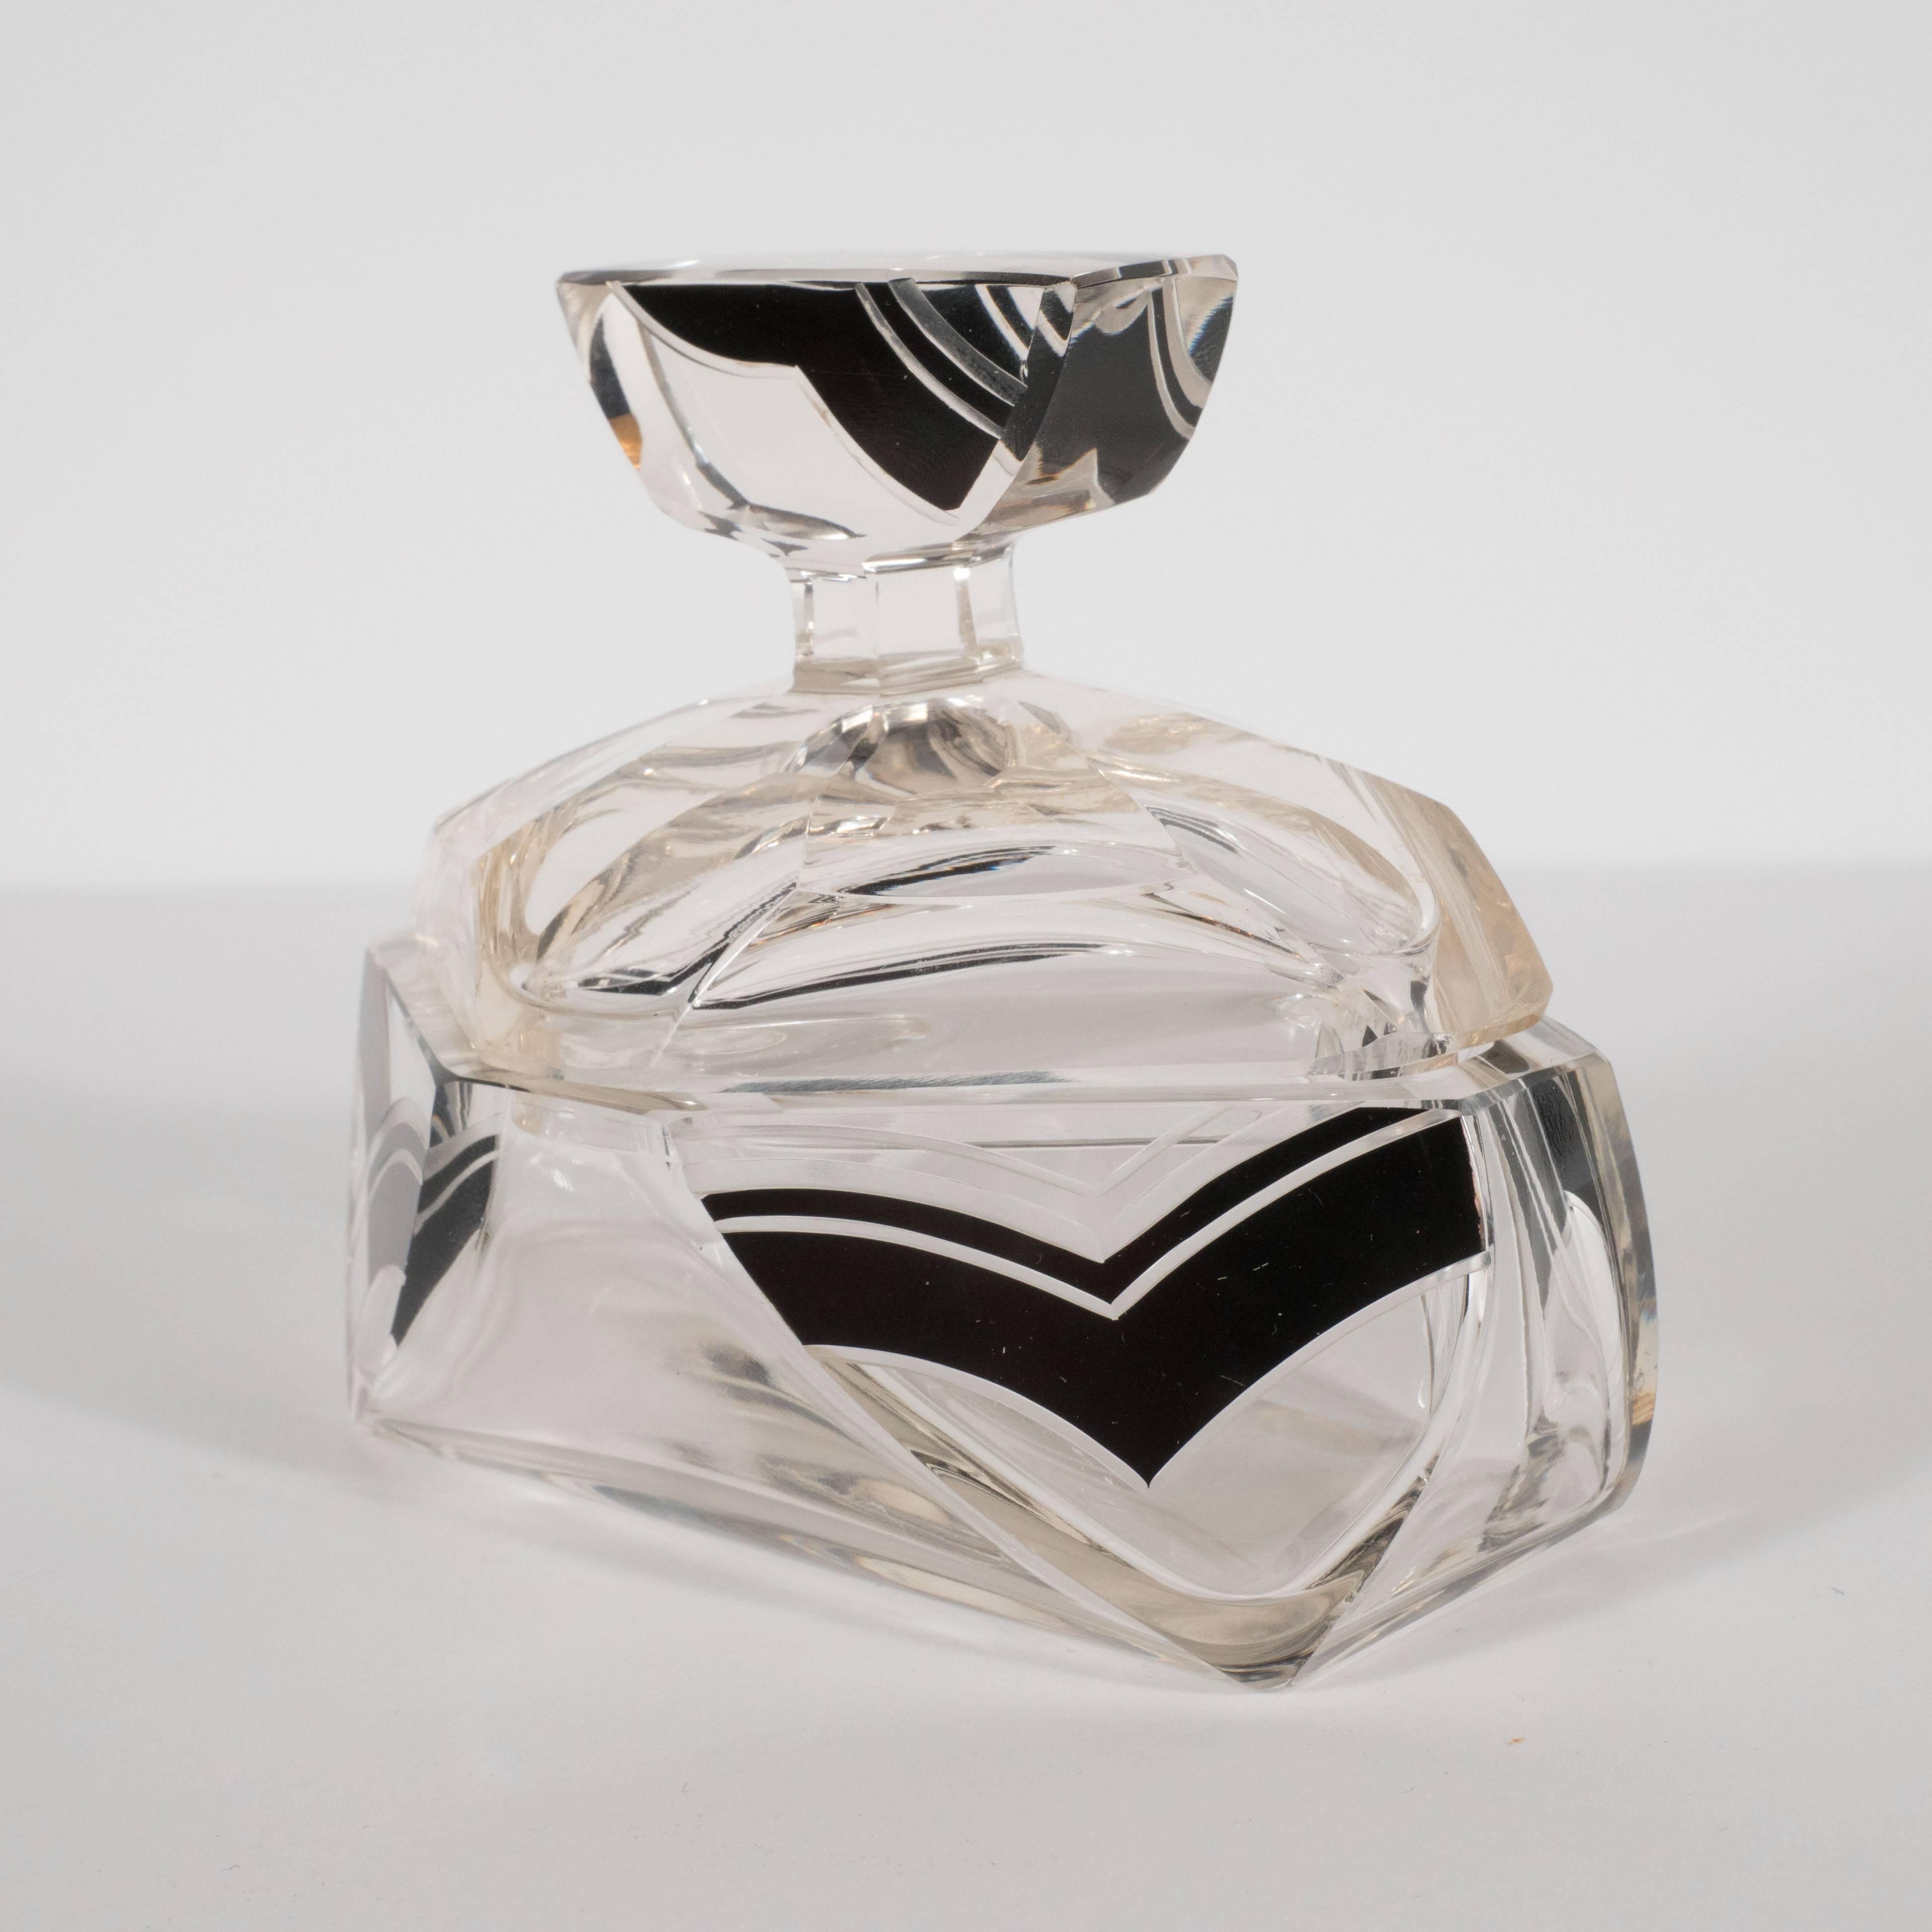 This elegant Art Deco glass perfume bottle was realized in the Czech Republic, circa 1930. It represents a particularly fine example of the renowned glass products of this time and place. It features an elongated octagonal with beveled sides as well